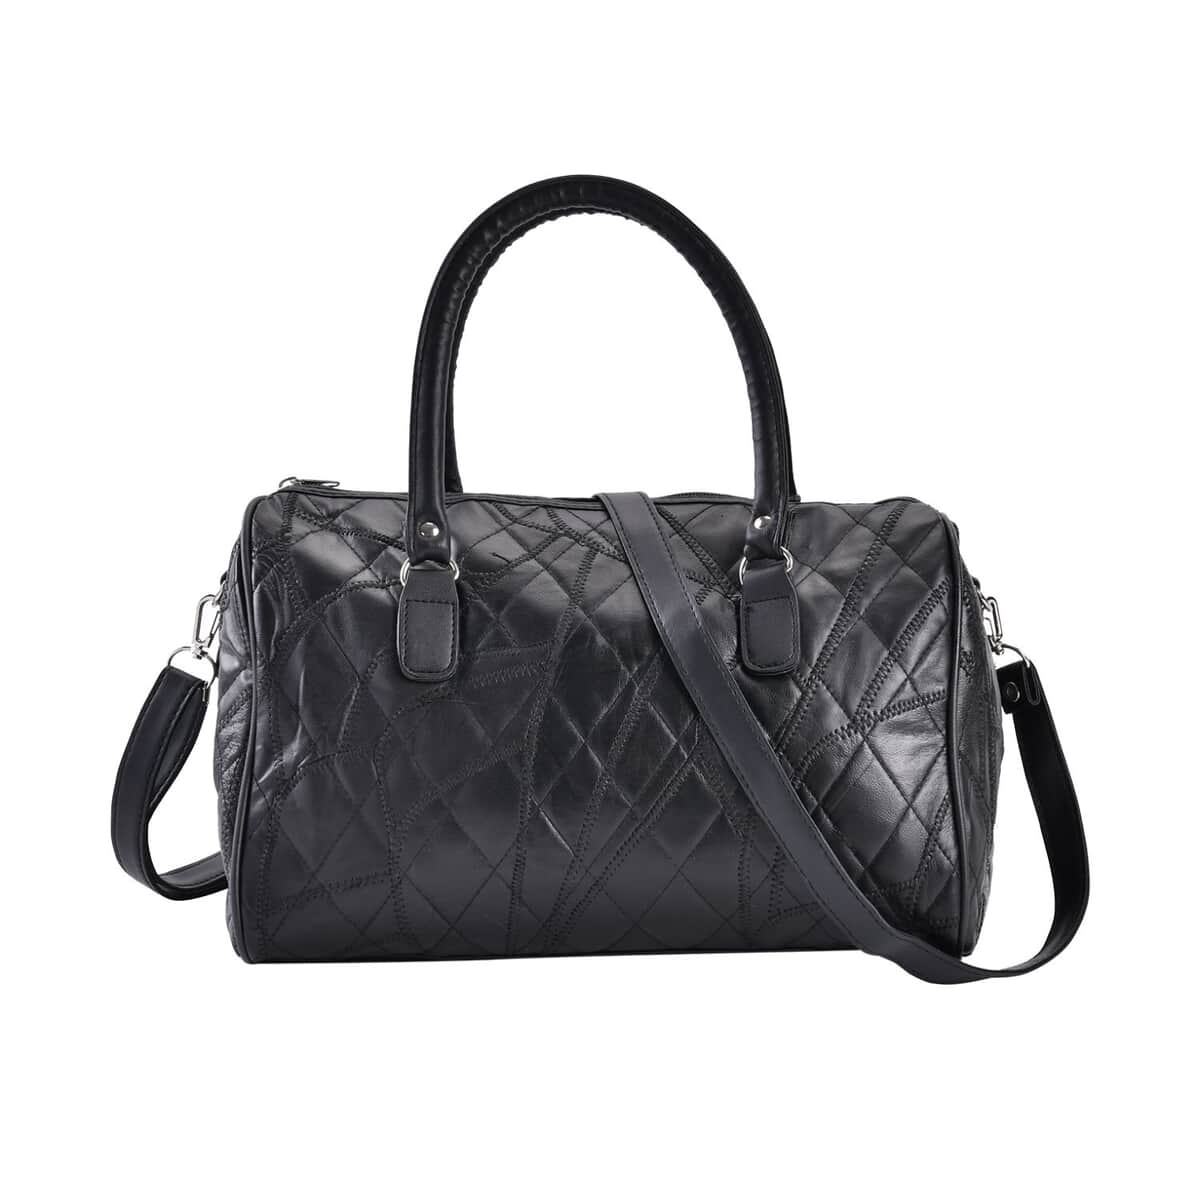 Black Patchwork Lambskin Leather Tote Bag with Handle Drop and Detachable Shoulder Strap image number 0